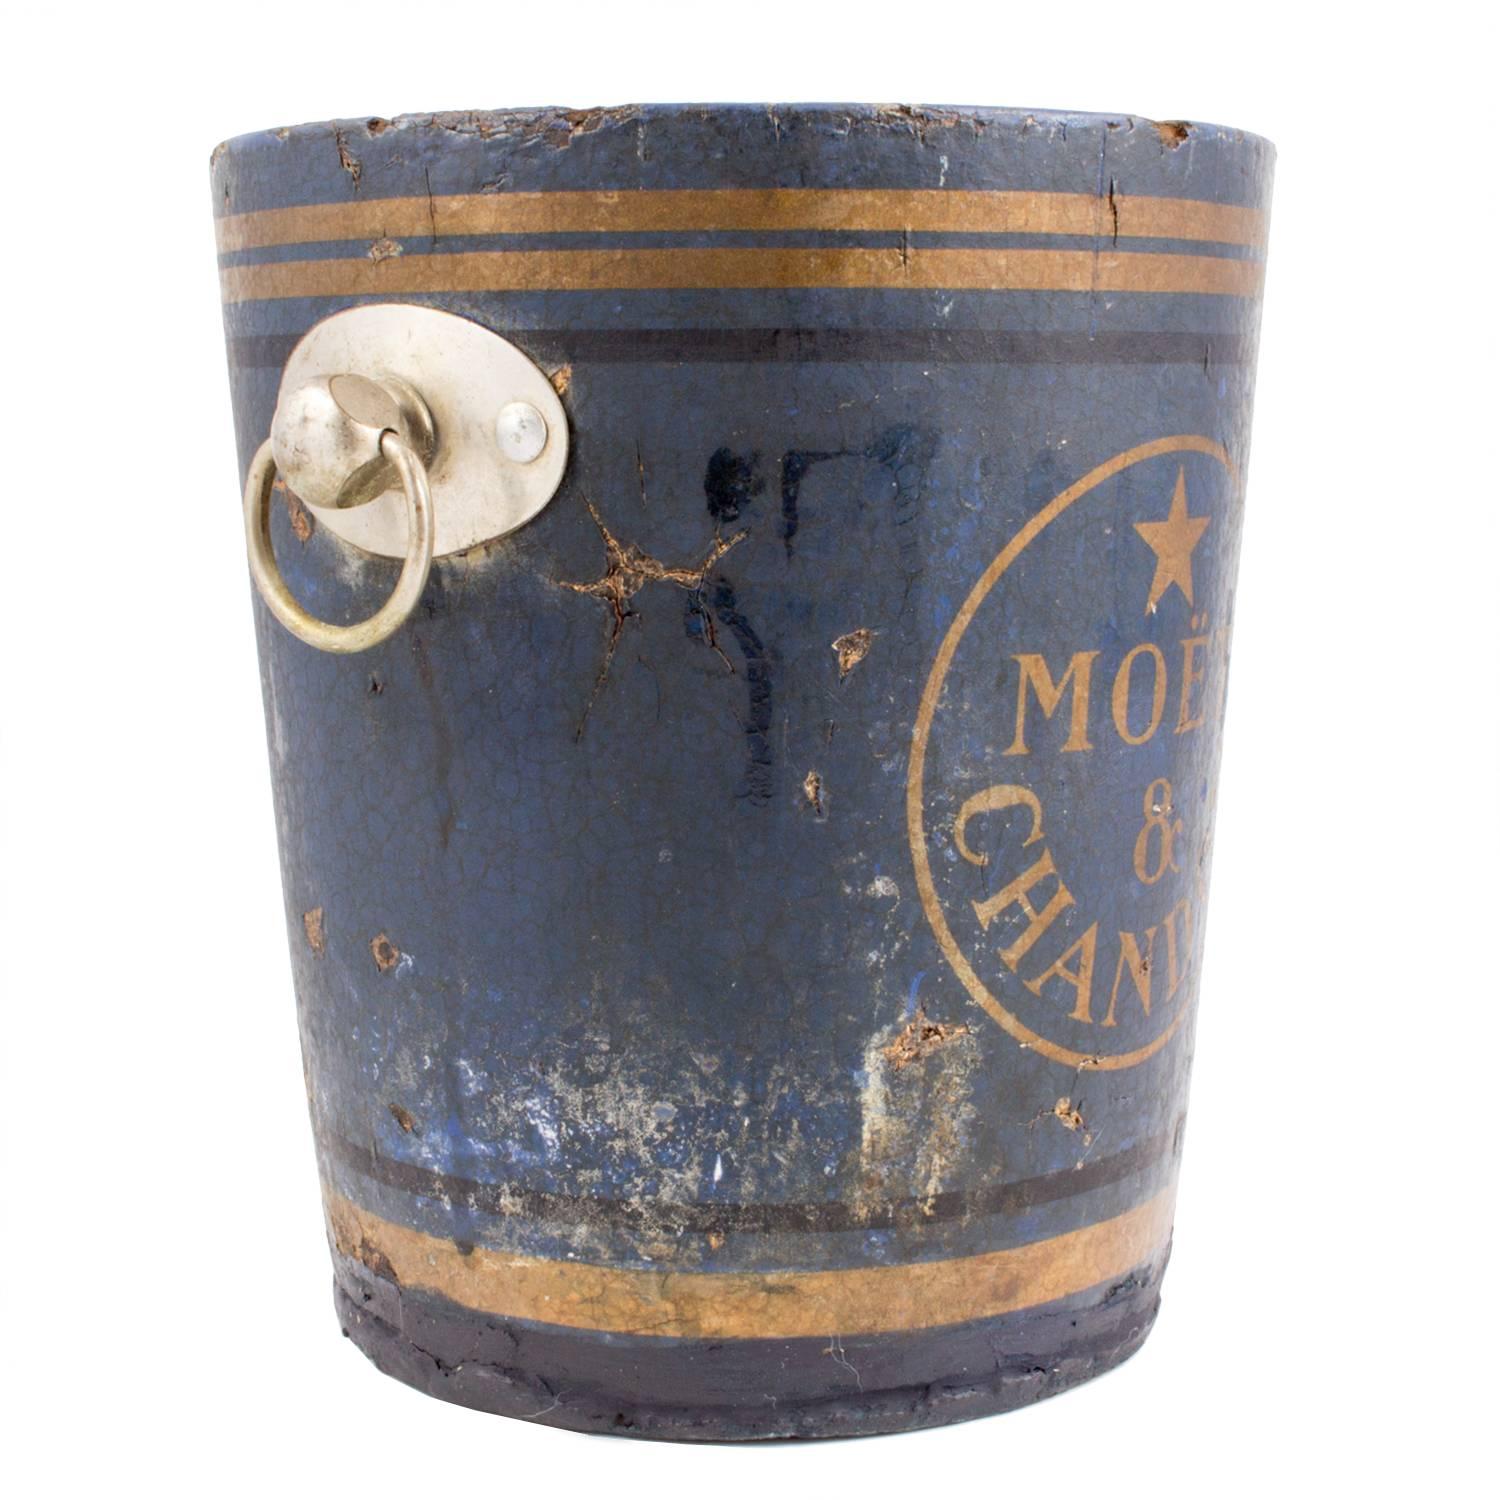 Truly one of our most fabulous finds on our most recent trip to France, this antique Moët & Chandon champagne bucket is actually papier mâché and dates to as early as the 1860s. The first blue label vintage was made by Moët & Chandon in 1861.